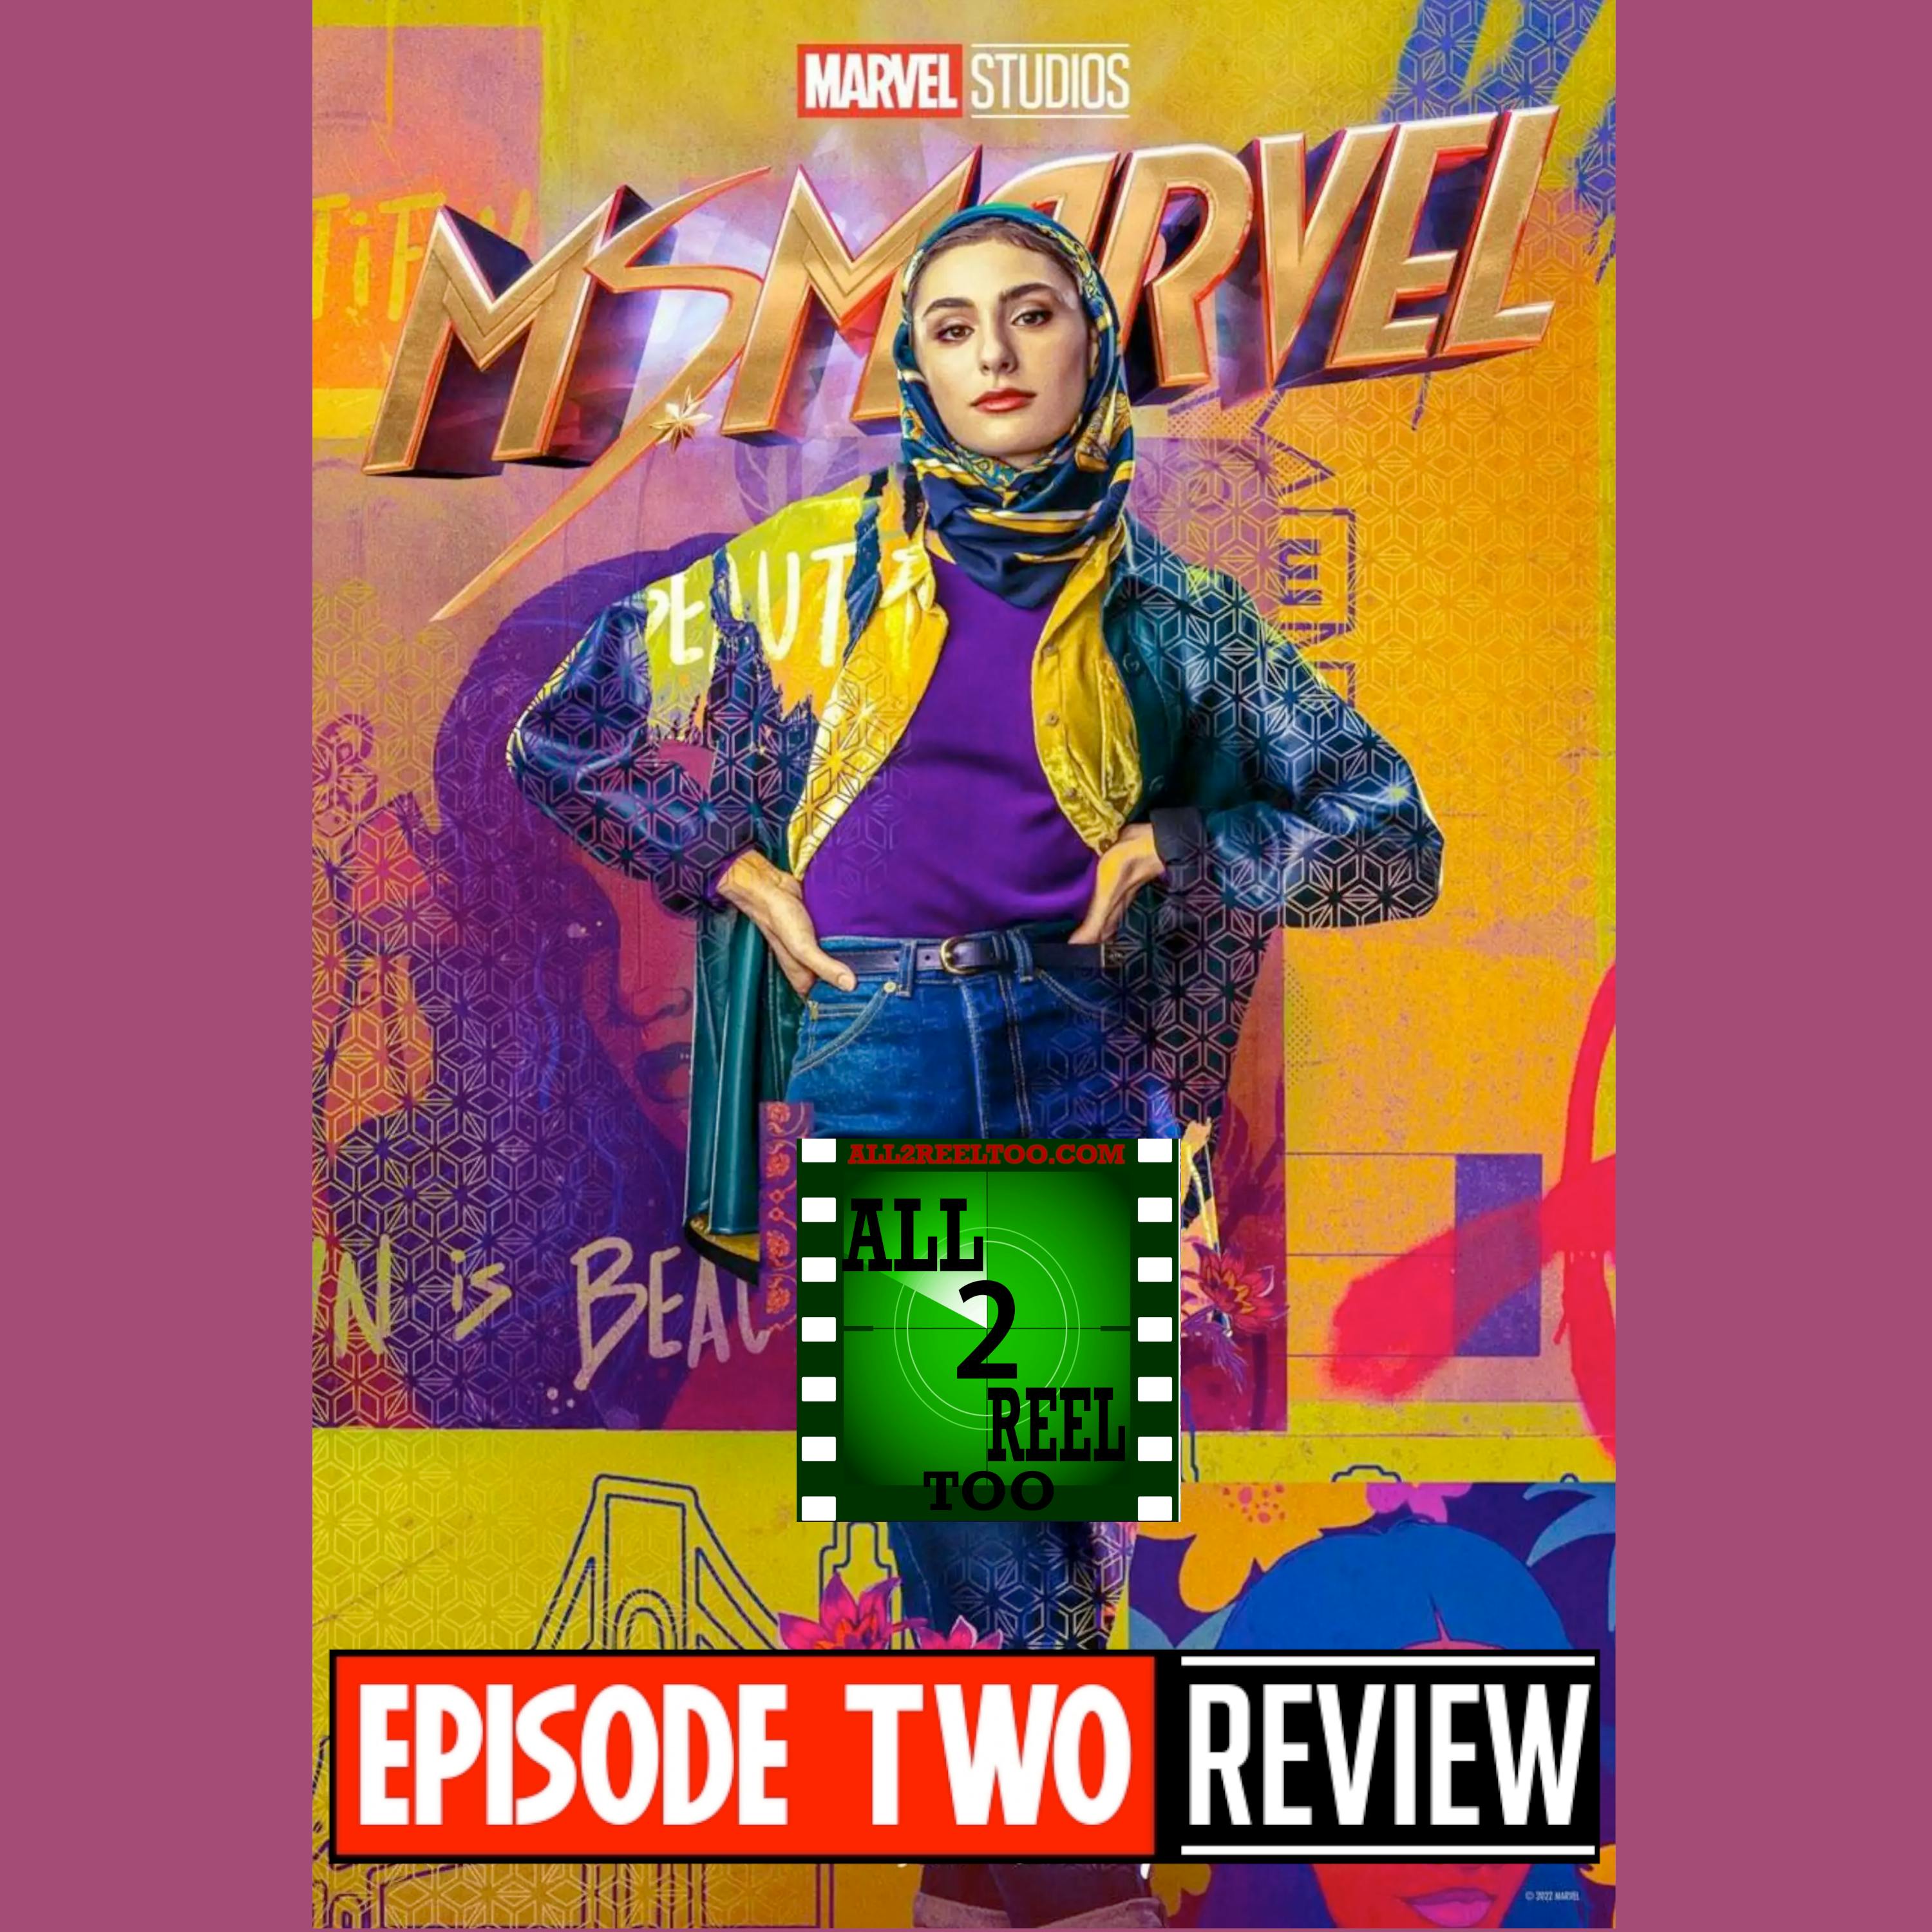 Ms. Marvel EPISODE 2 REVIEW Image